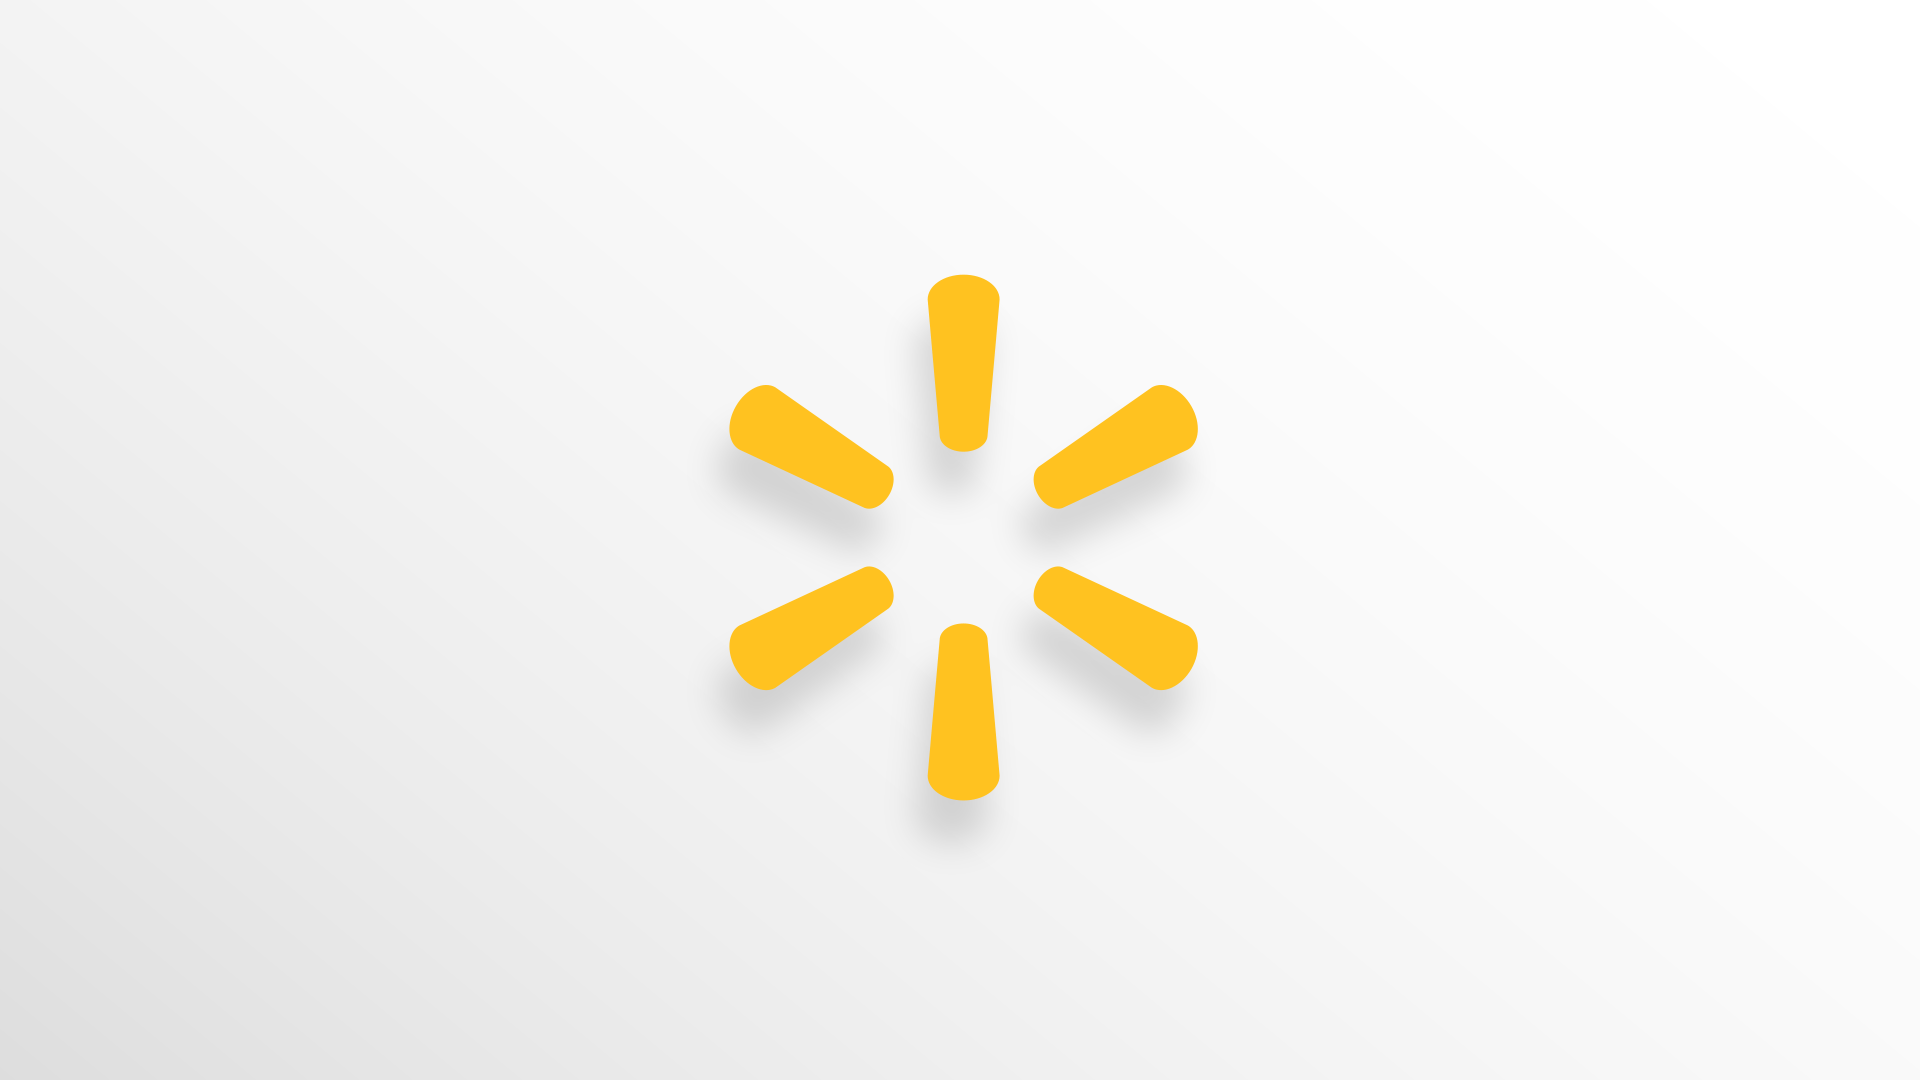 Walmart names new division leaders in operations restructuring |  Supermarket News